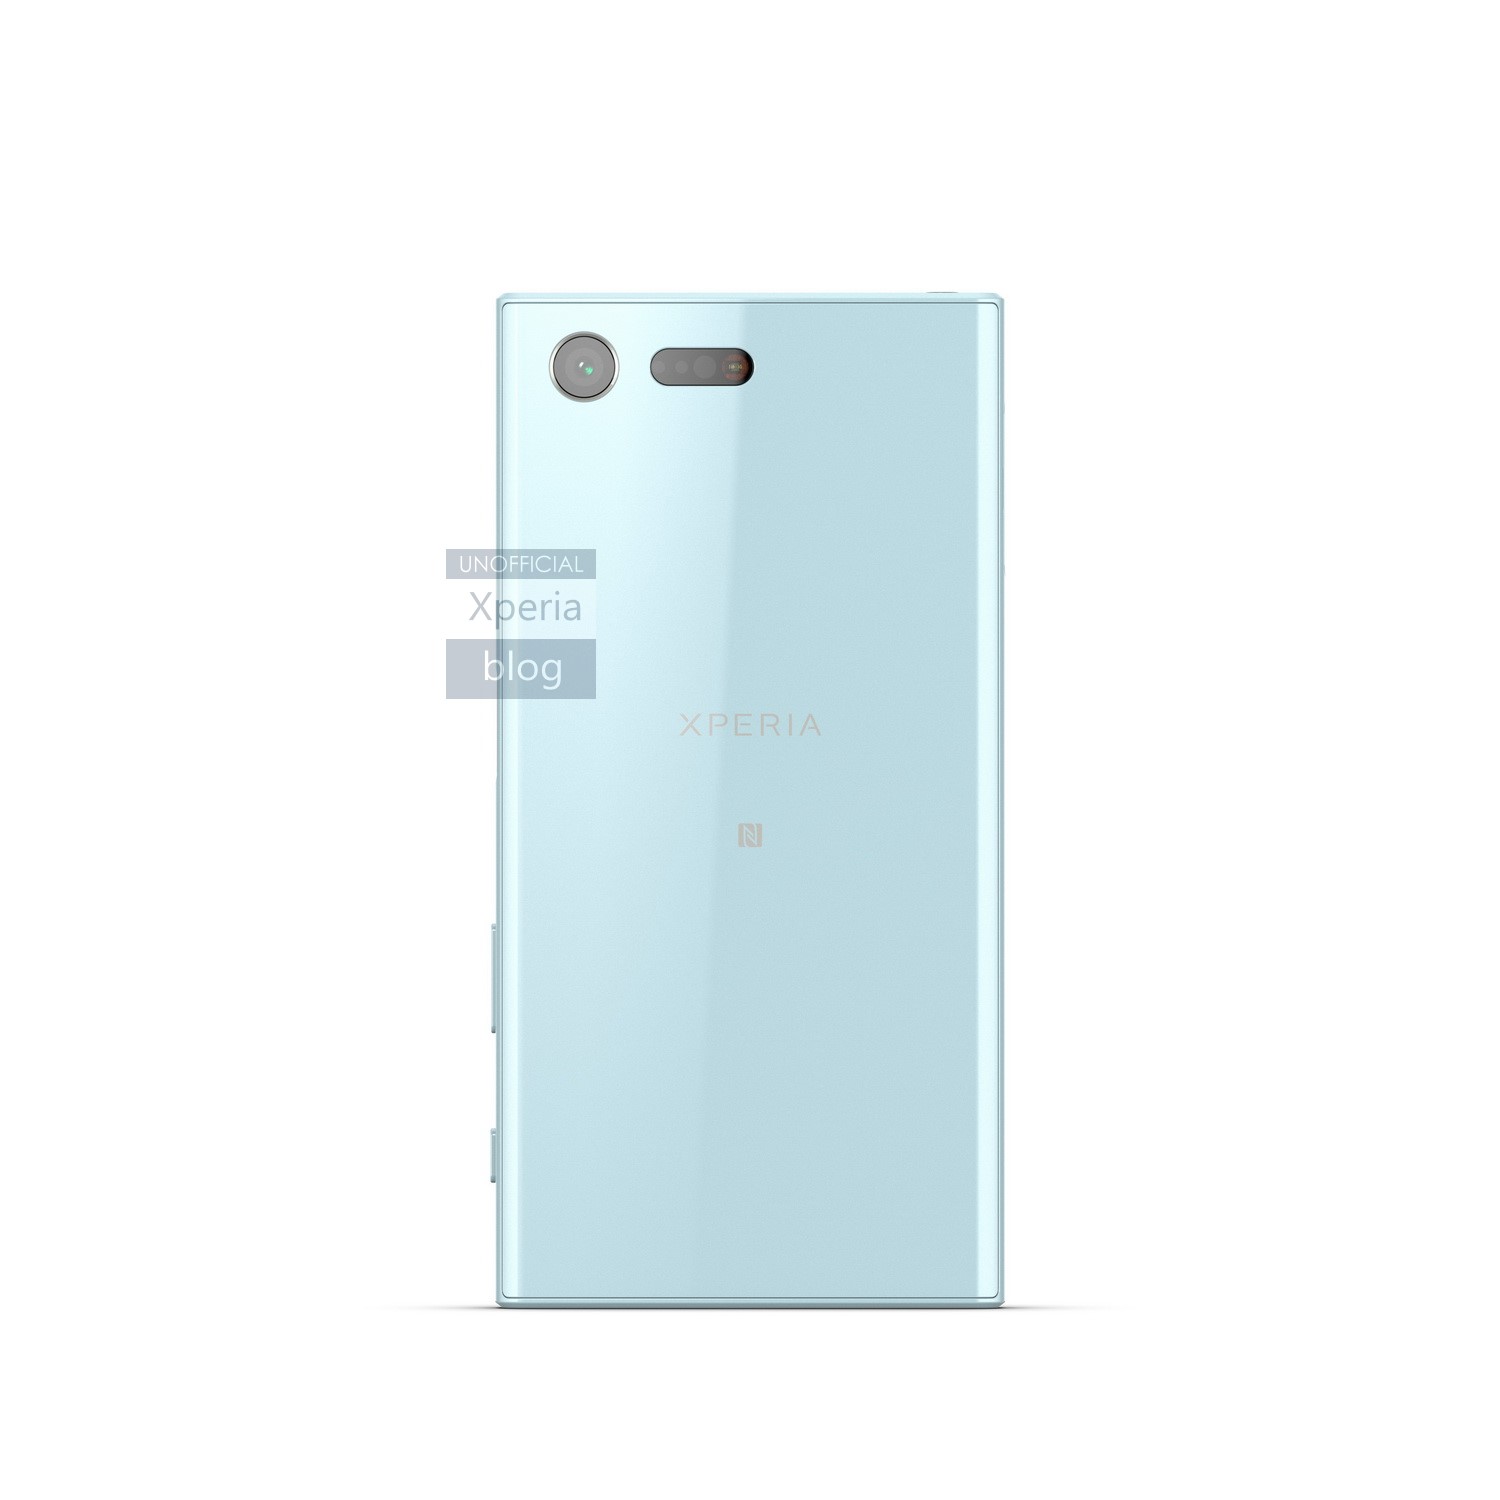 Sony-Xperia-X-Compact_1